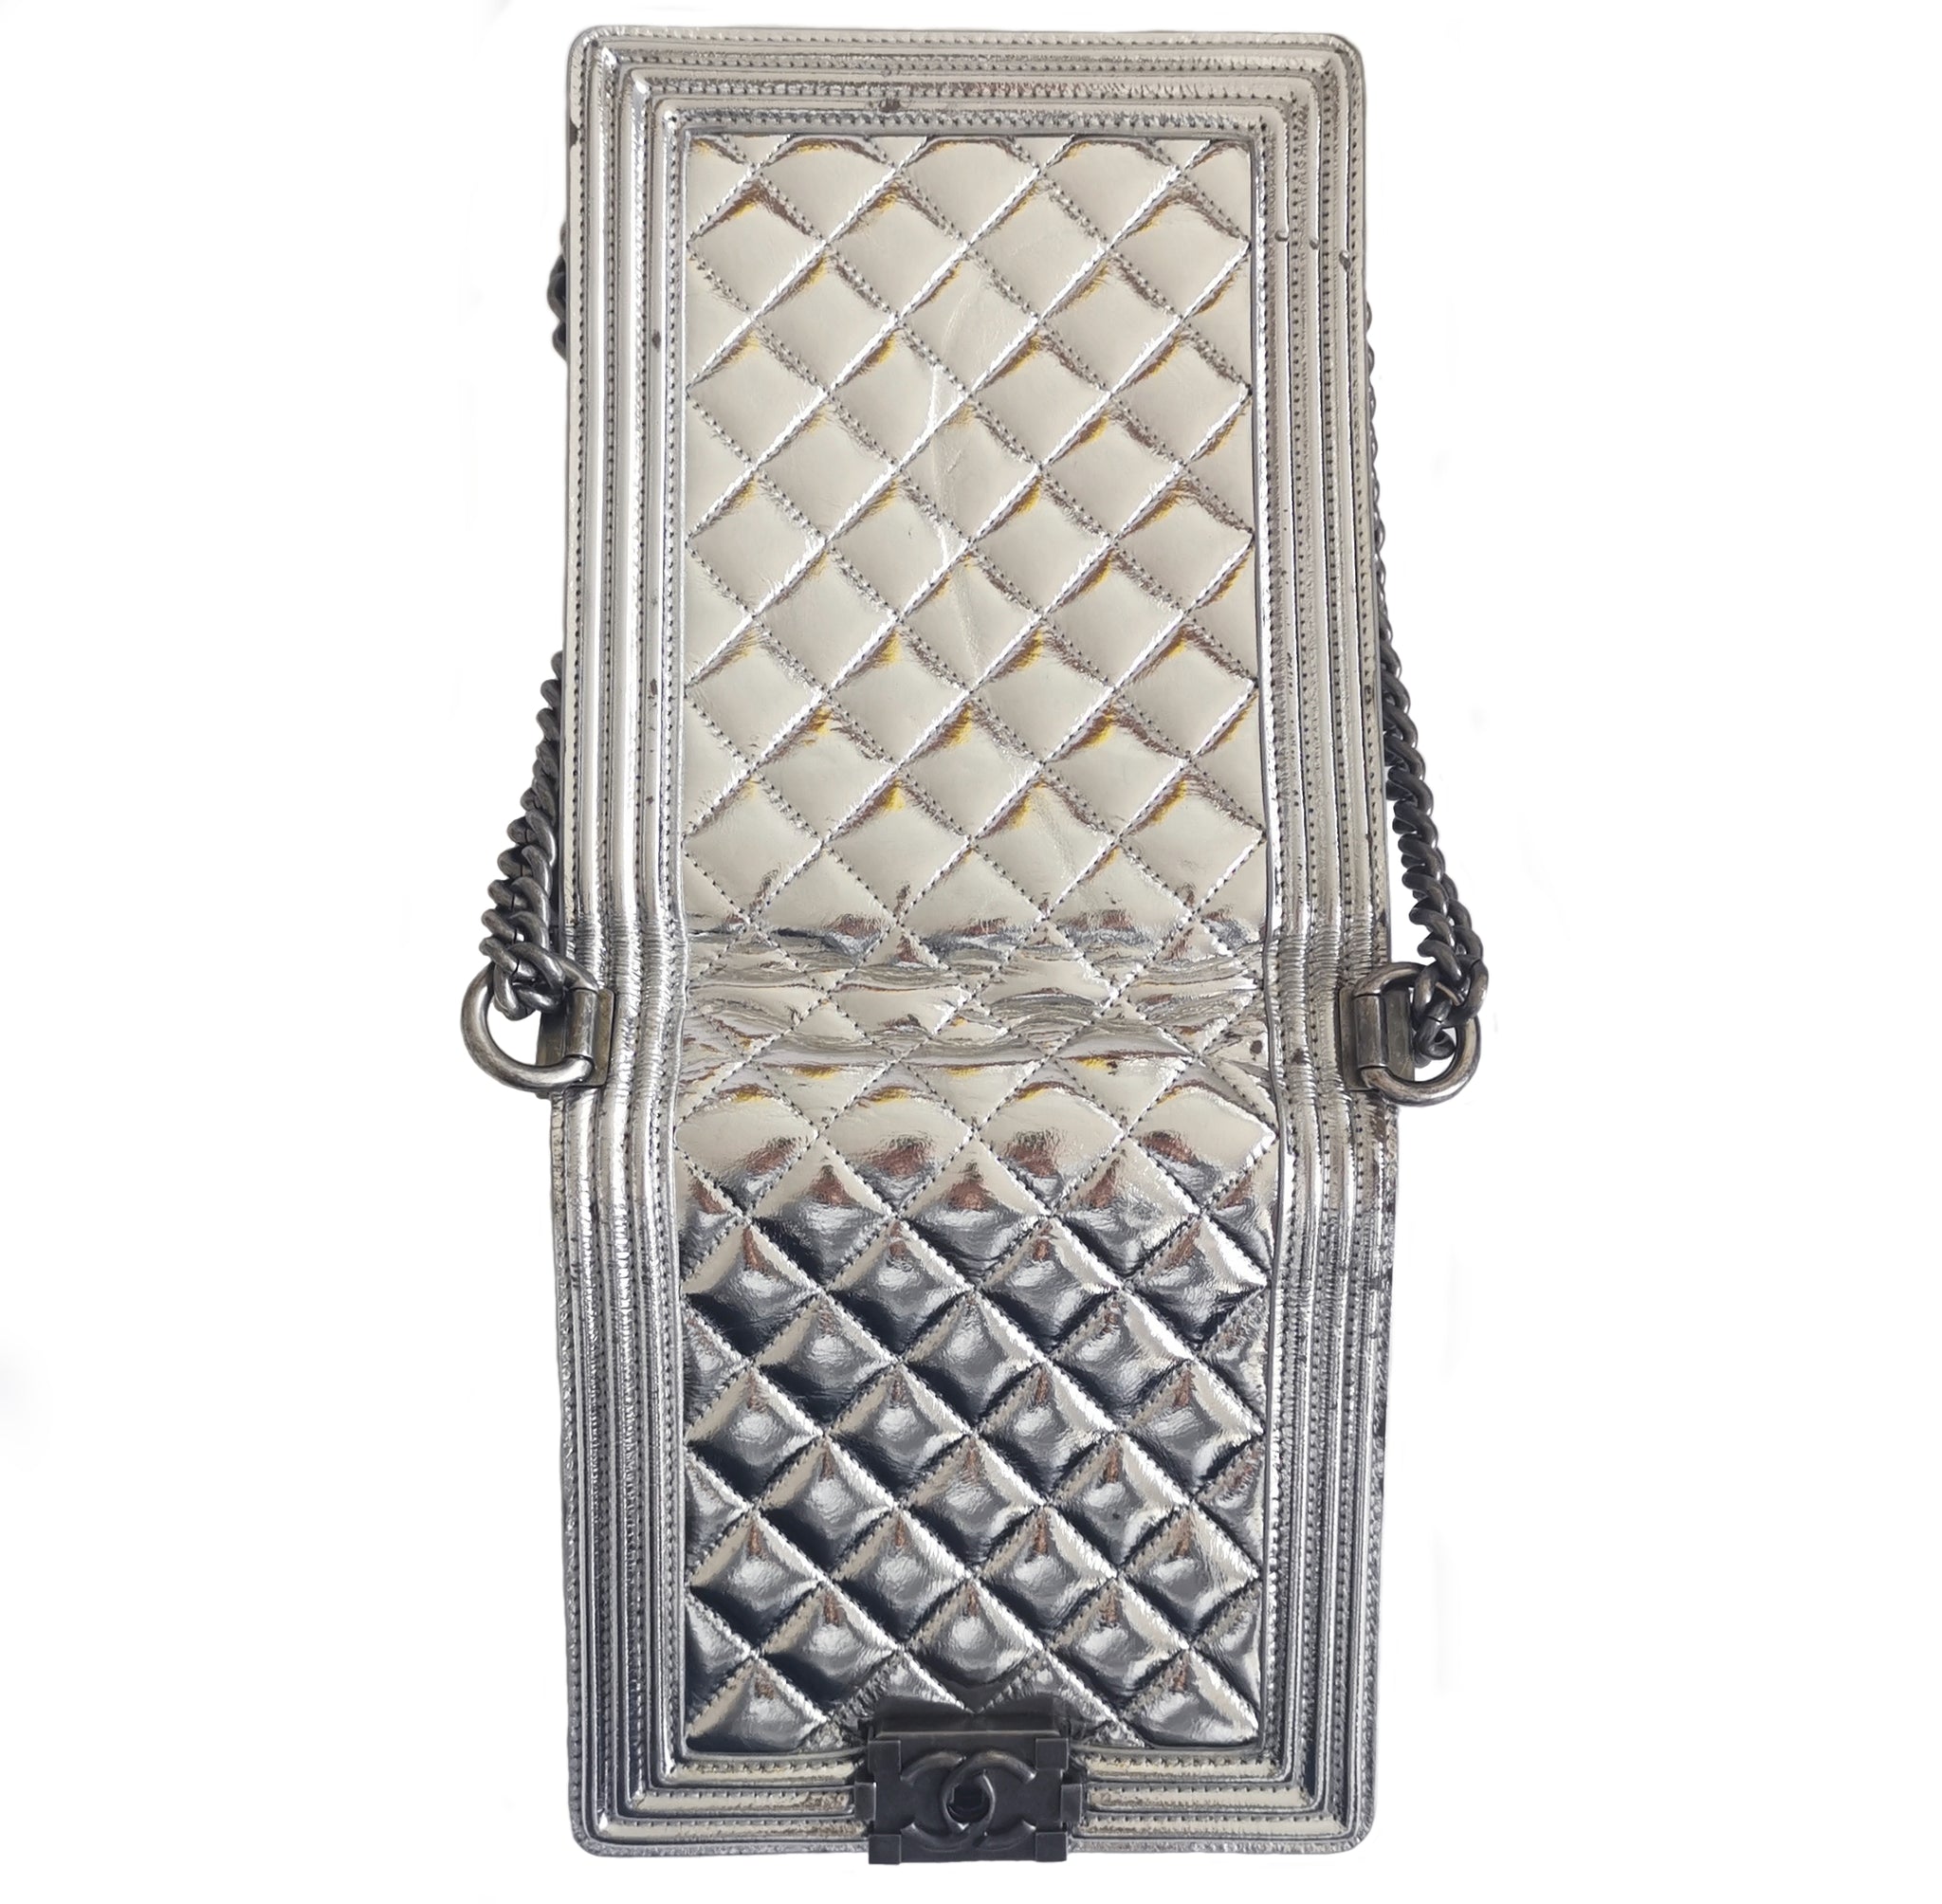 Chanel Silver Quilted Leather North South Boy Flap Bag Chanel